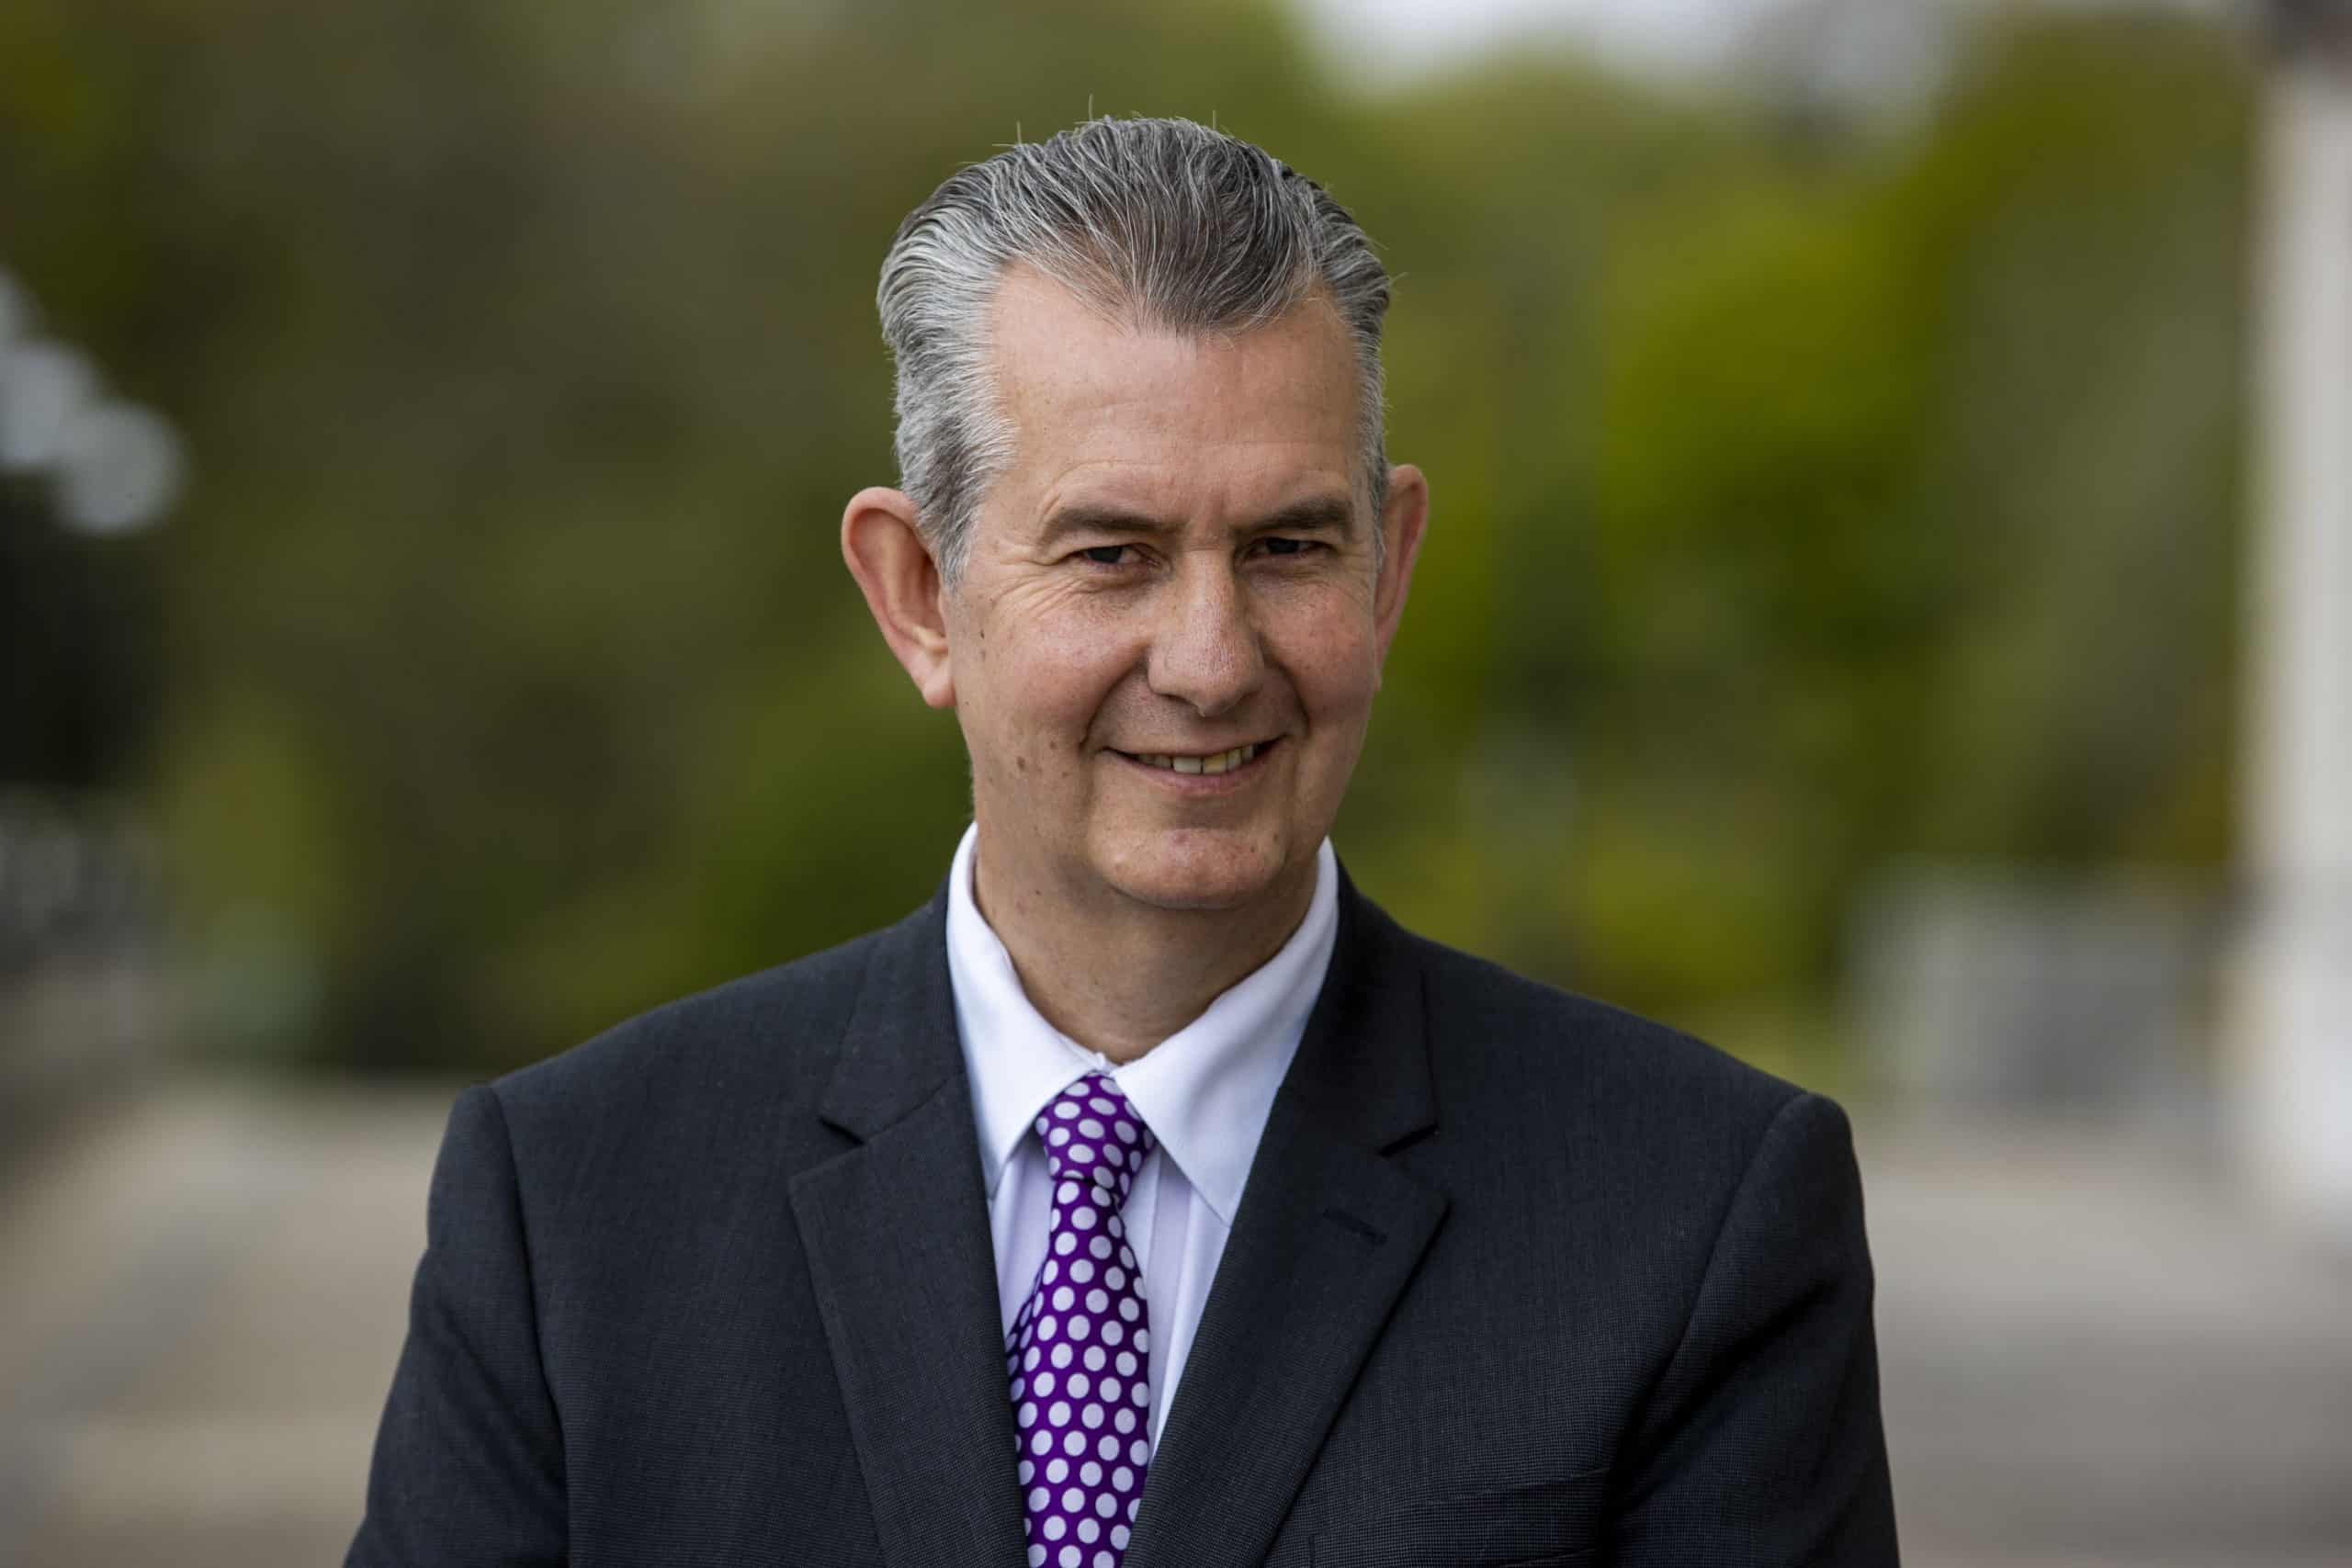 We can’t believe these quotes from new DUP leader Edwin Poots are real